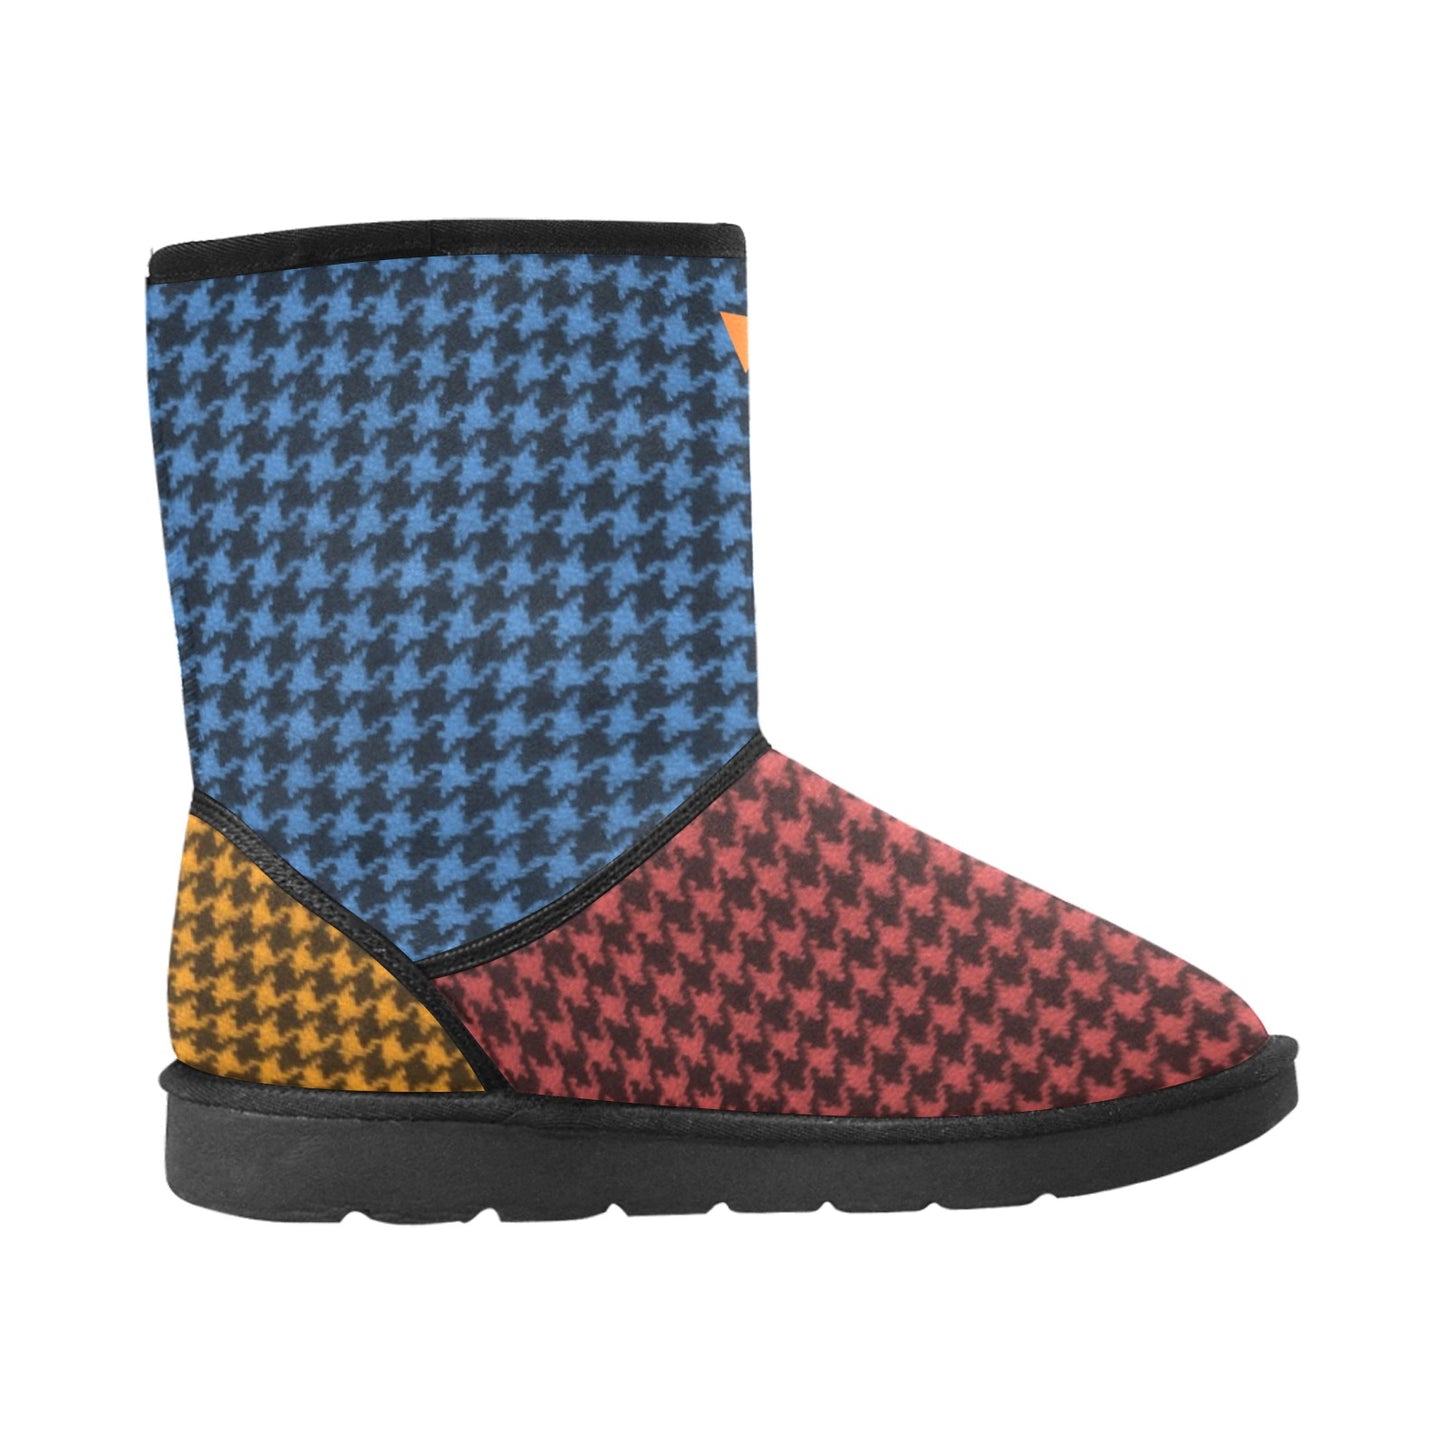 Hounds Vluxe by Lucky Nahum Men's Snow Boots